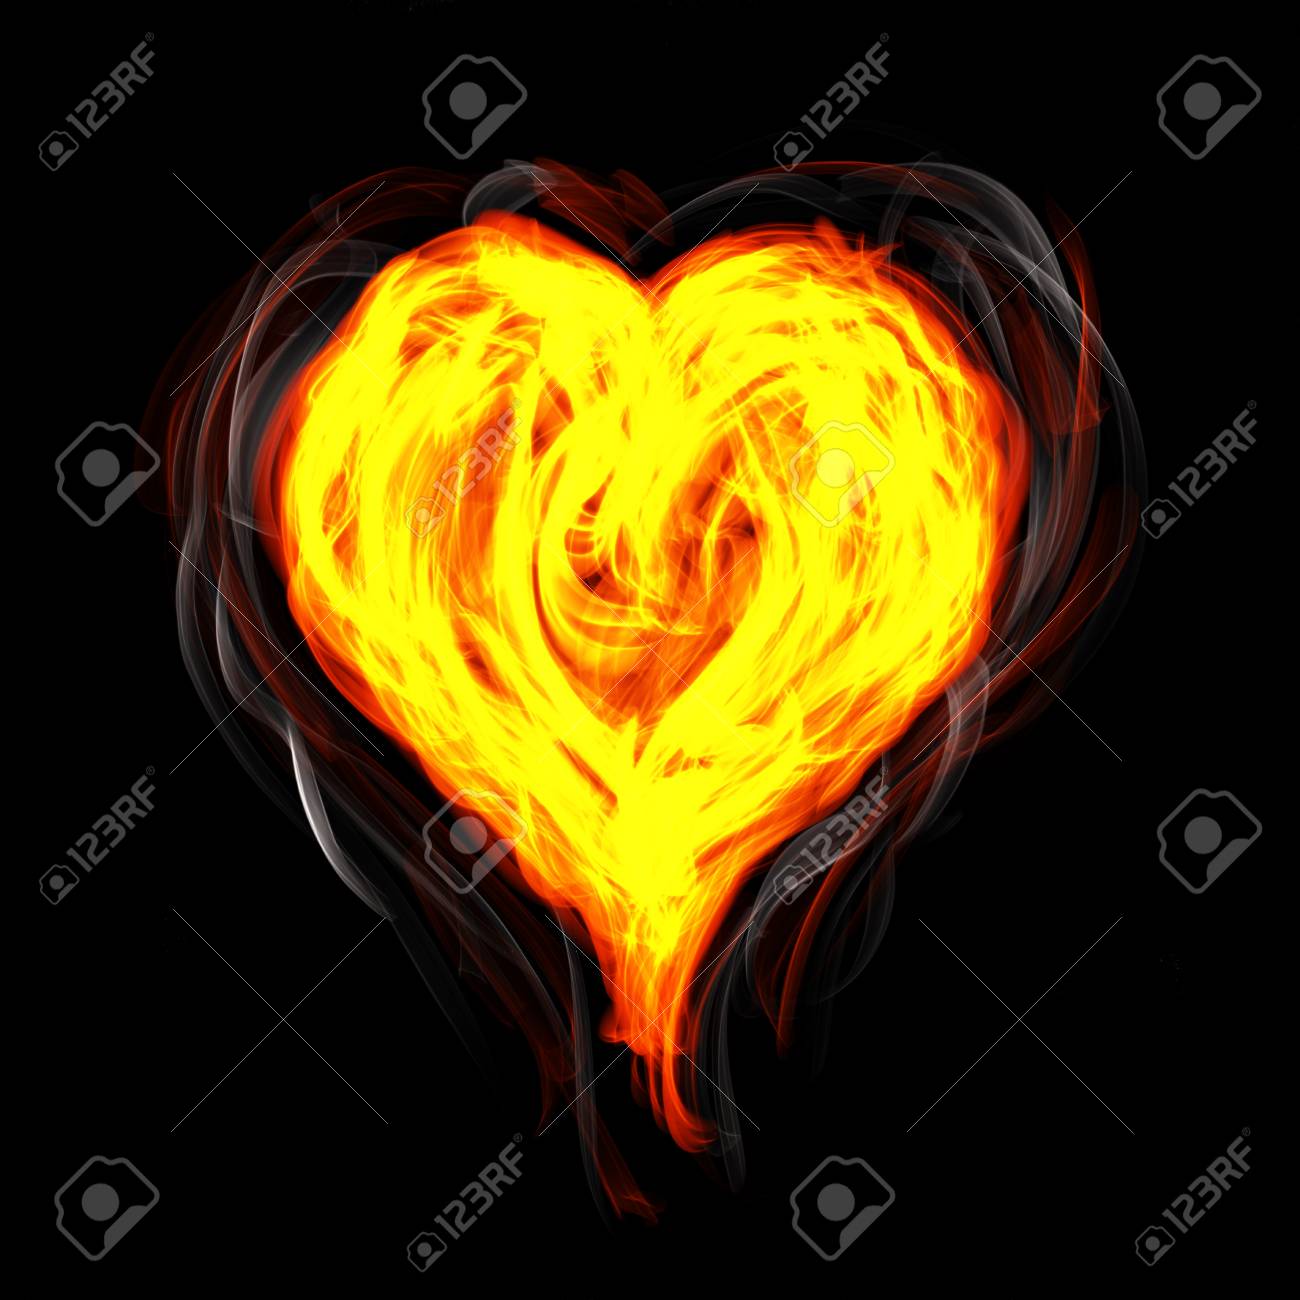 Hot Fire Heart Burning On Black Background Passion And Desire